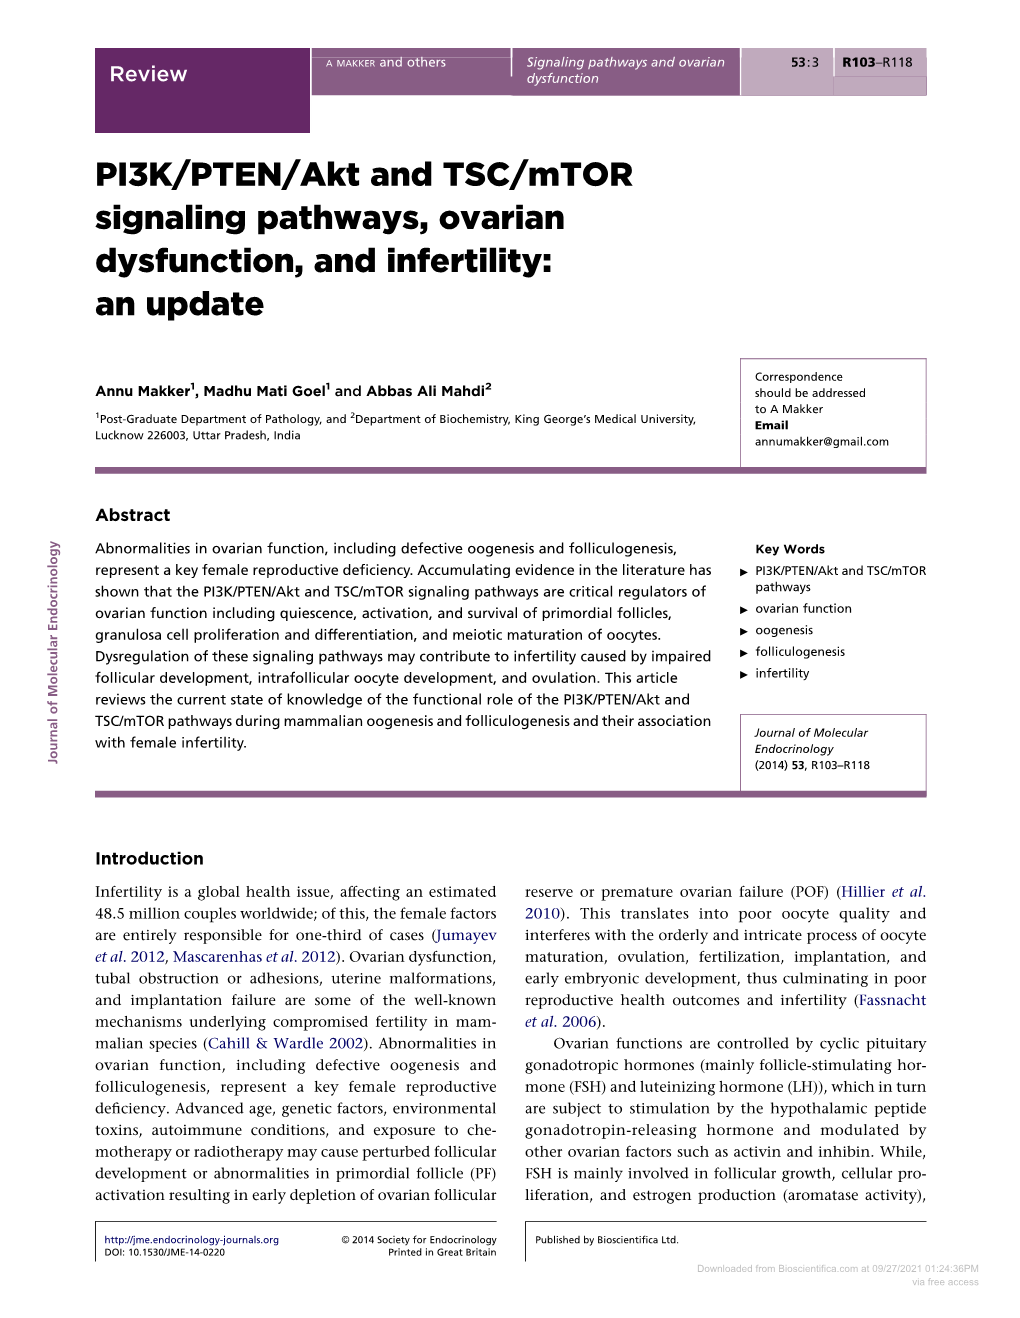 PI3K/PTEN/Akt and TSC/Mtor Signaling Pathways, Ovarian Dysfunction, and Infertility: an Update